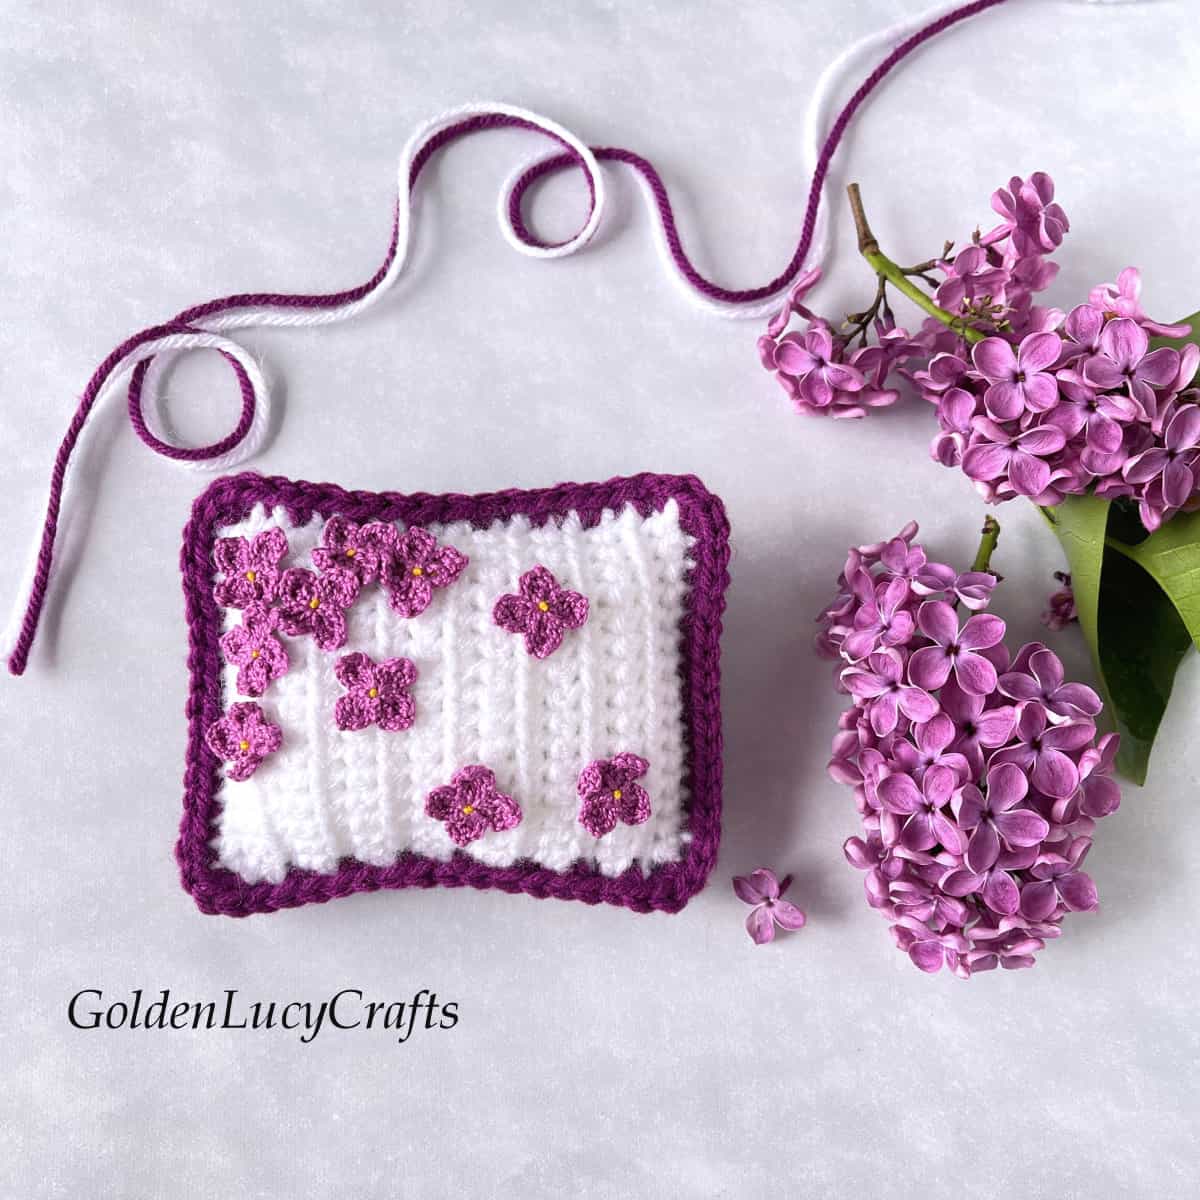 Crochet mini pillow - pincushion embellished with lilac flowers.